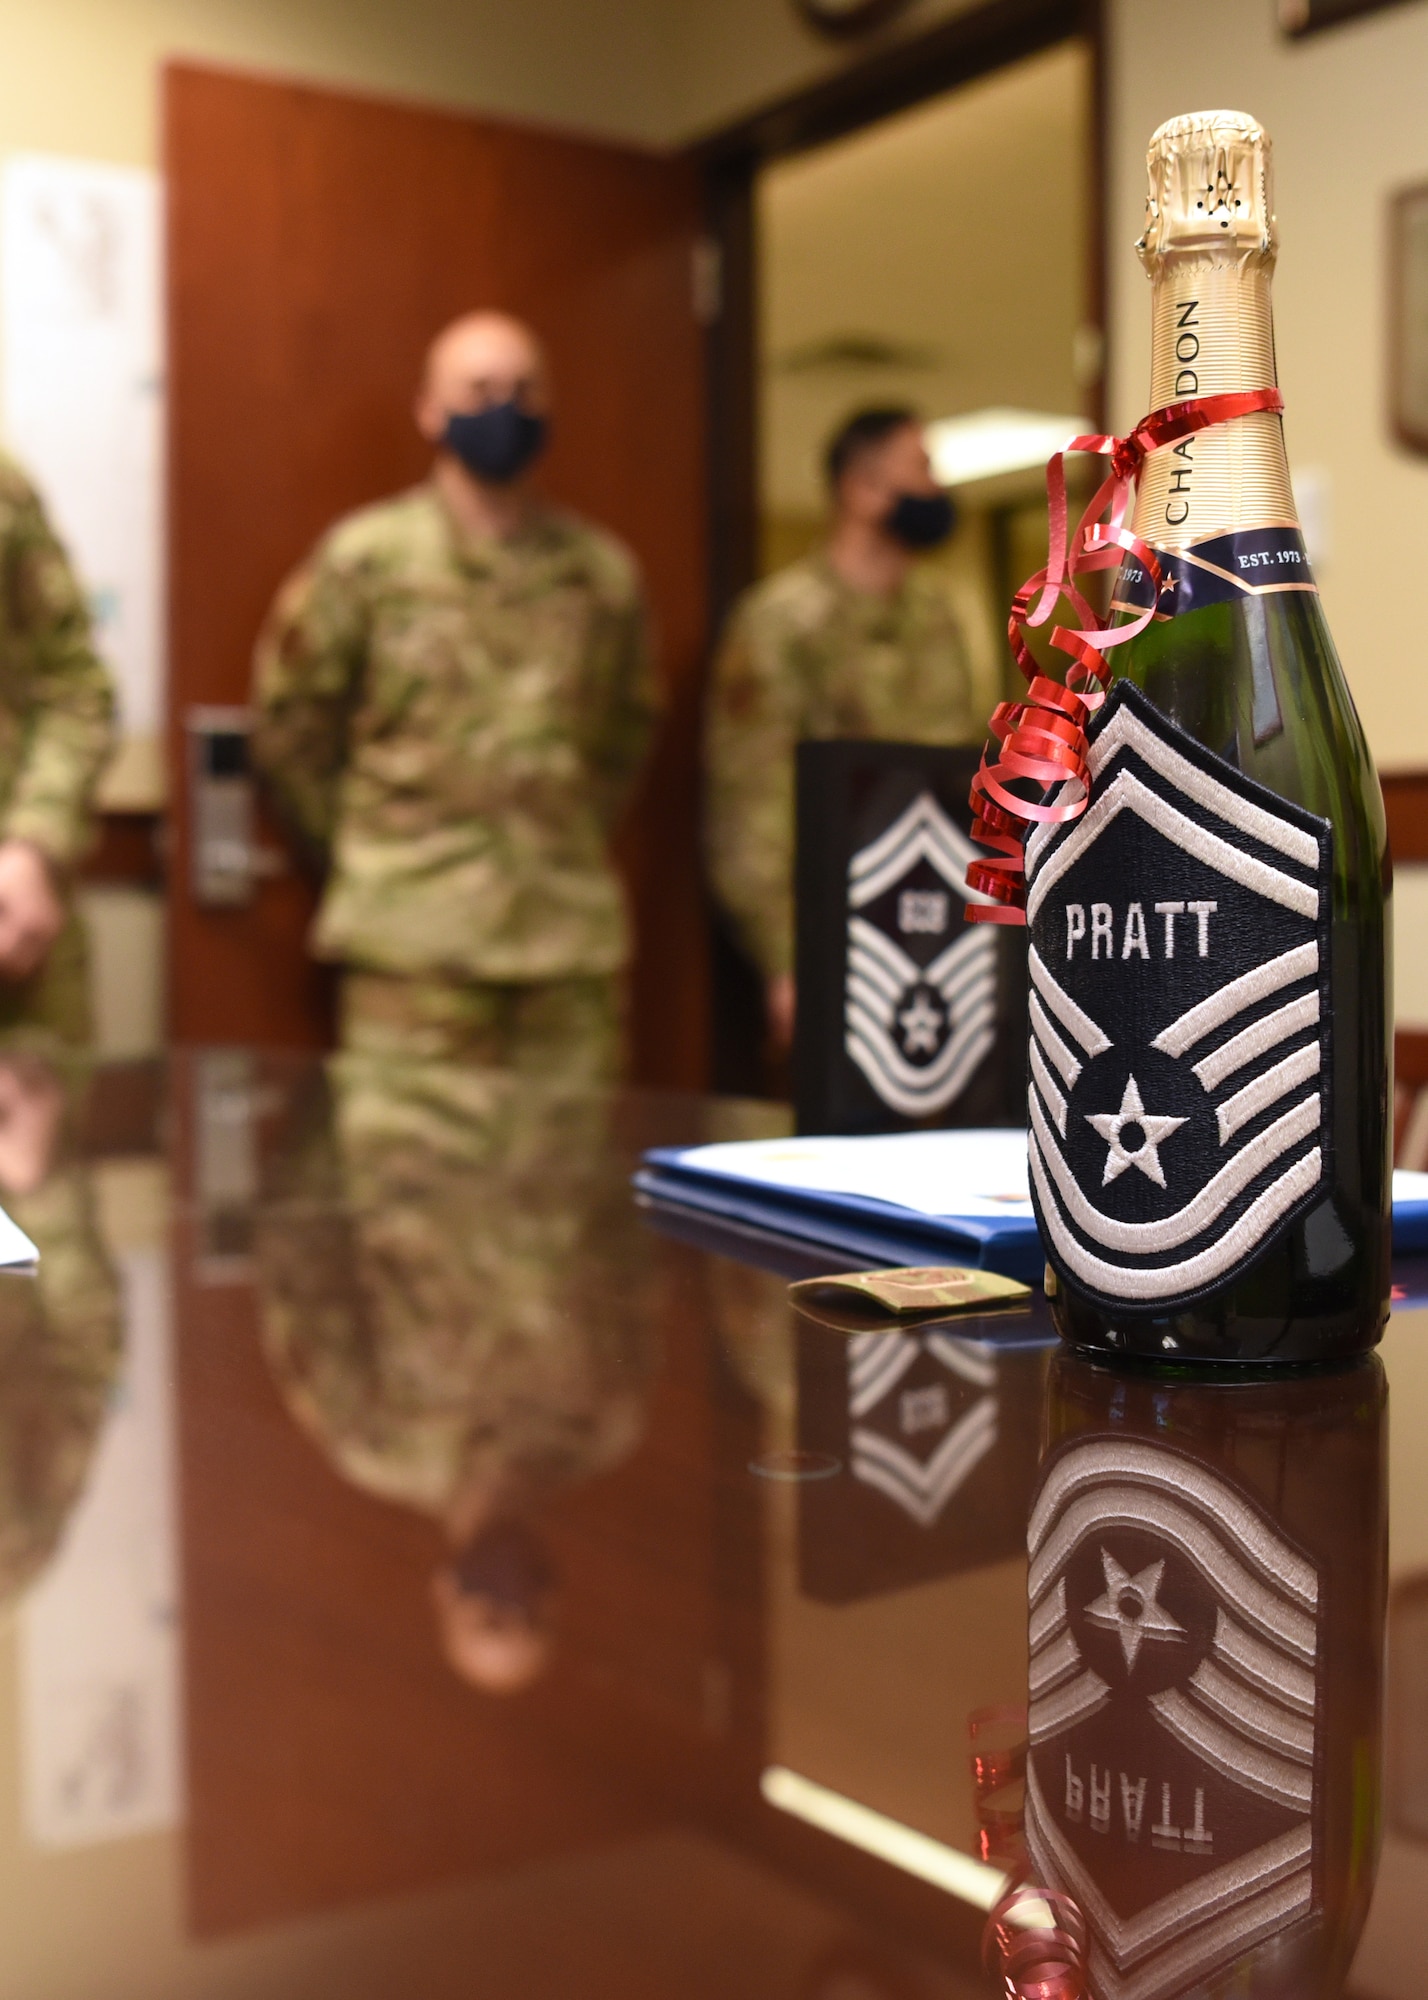 A Senior Master Sgt. selectee’s congratulatory gift is on a table in the Norma Brown building on Goodfellow Air Force Base, Texas, March 15, 2021.  Out of 17,107 individuals eligible for promotion this year, only 1,194 individuals were selected for the rank of Senior Master Sgt. (U.S. Air Force photo by Senior Airman Abbey Rieves)